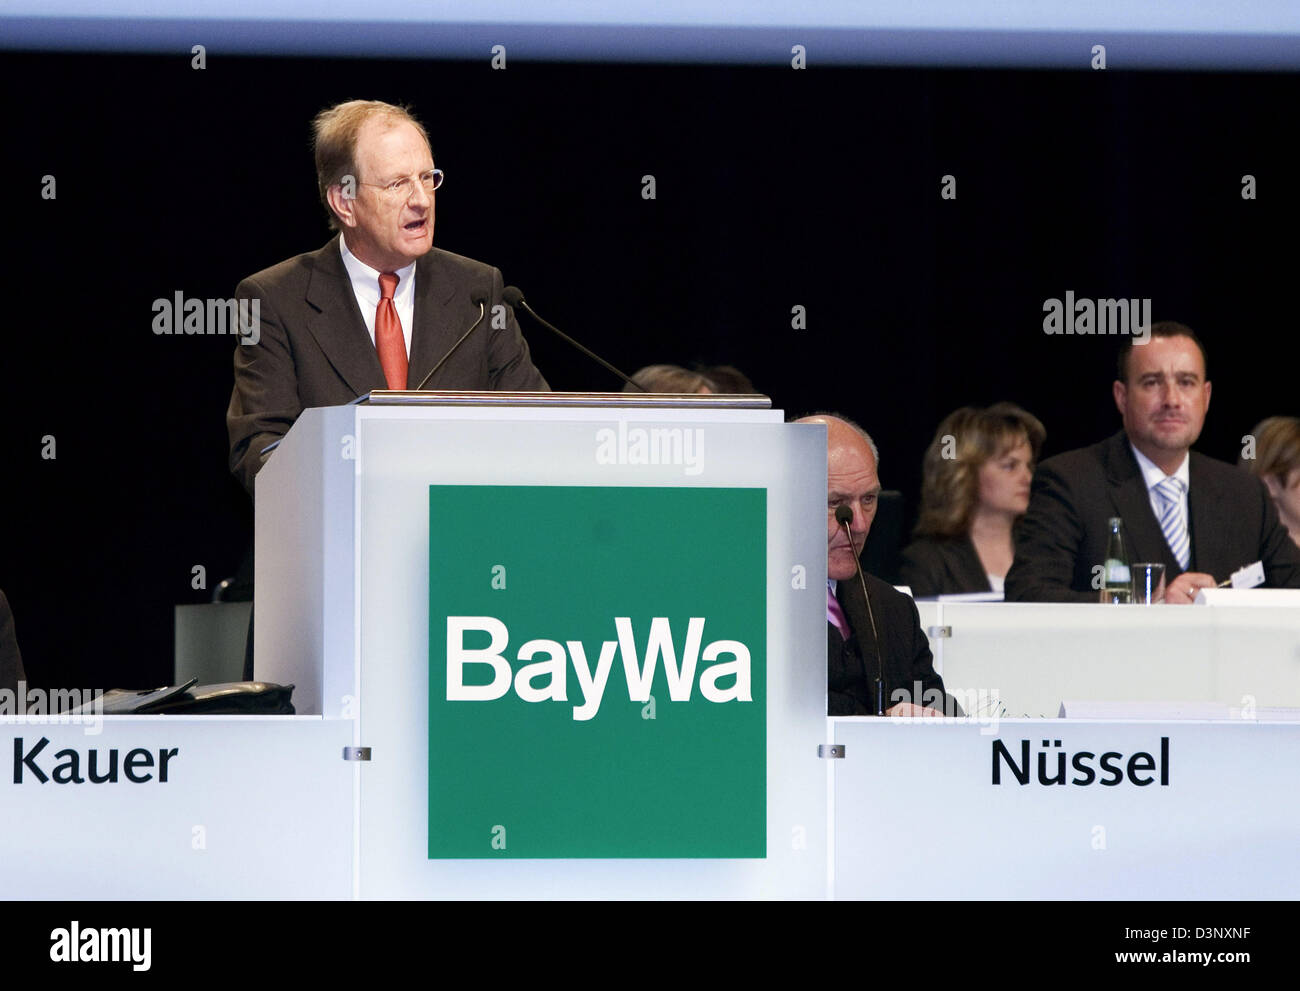 Wolfgang Deml (L), CEO of BayWa AG, gives a speech during the company's annual general meeting in Munich, Germany, Thursday 11 May 2006. BayWa AG exceed its 2005 turnover by seven percent with a grand total of 6,537 million euros. Photo: Stephan Goerlich Stock Photo